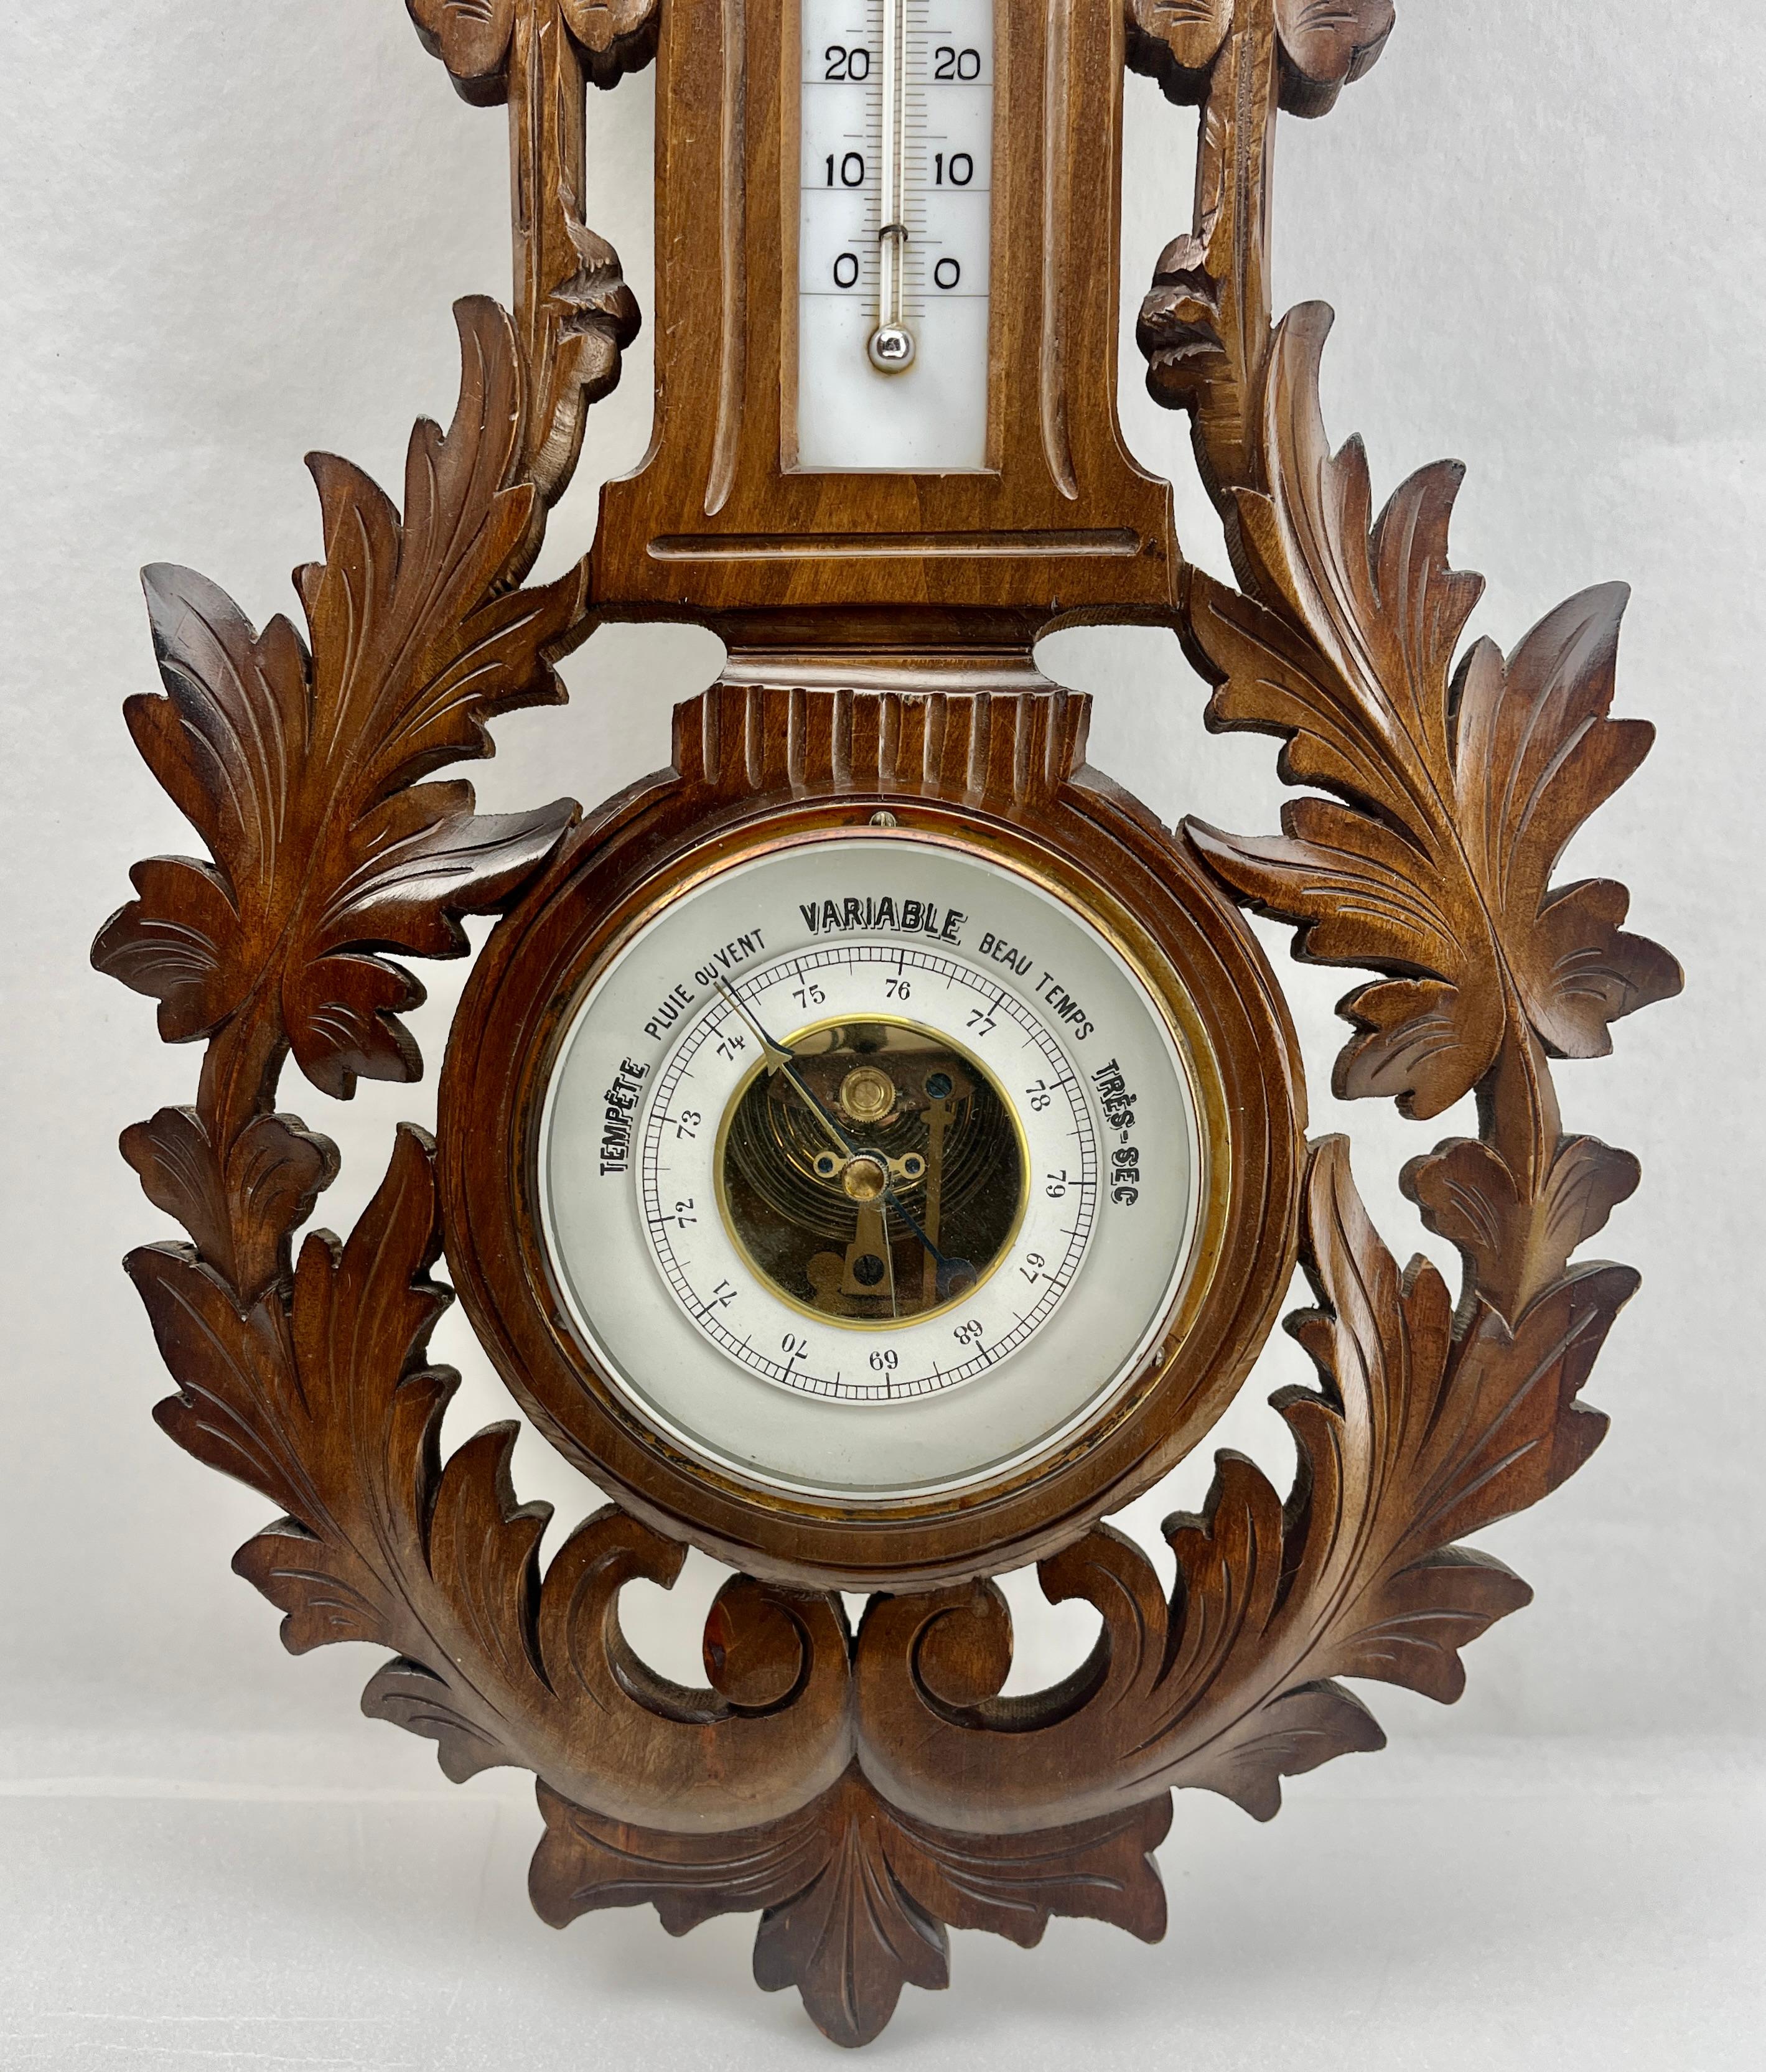 Wall-mounted weather station in carved walnut made in Liege Belgium by G.Tart. 
High quality mechanism with Jeweled movement barometer and thermometer (in centigrade)
Unusual design with high relief C-scrolls and flowers in Rococo style (from the